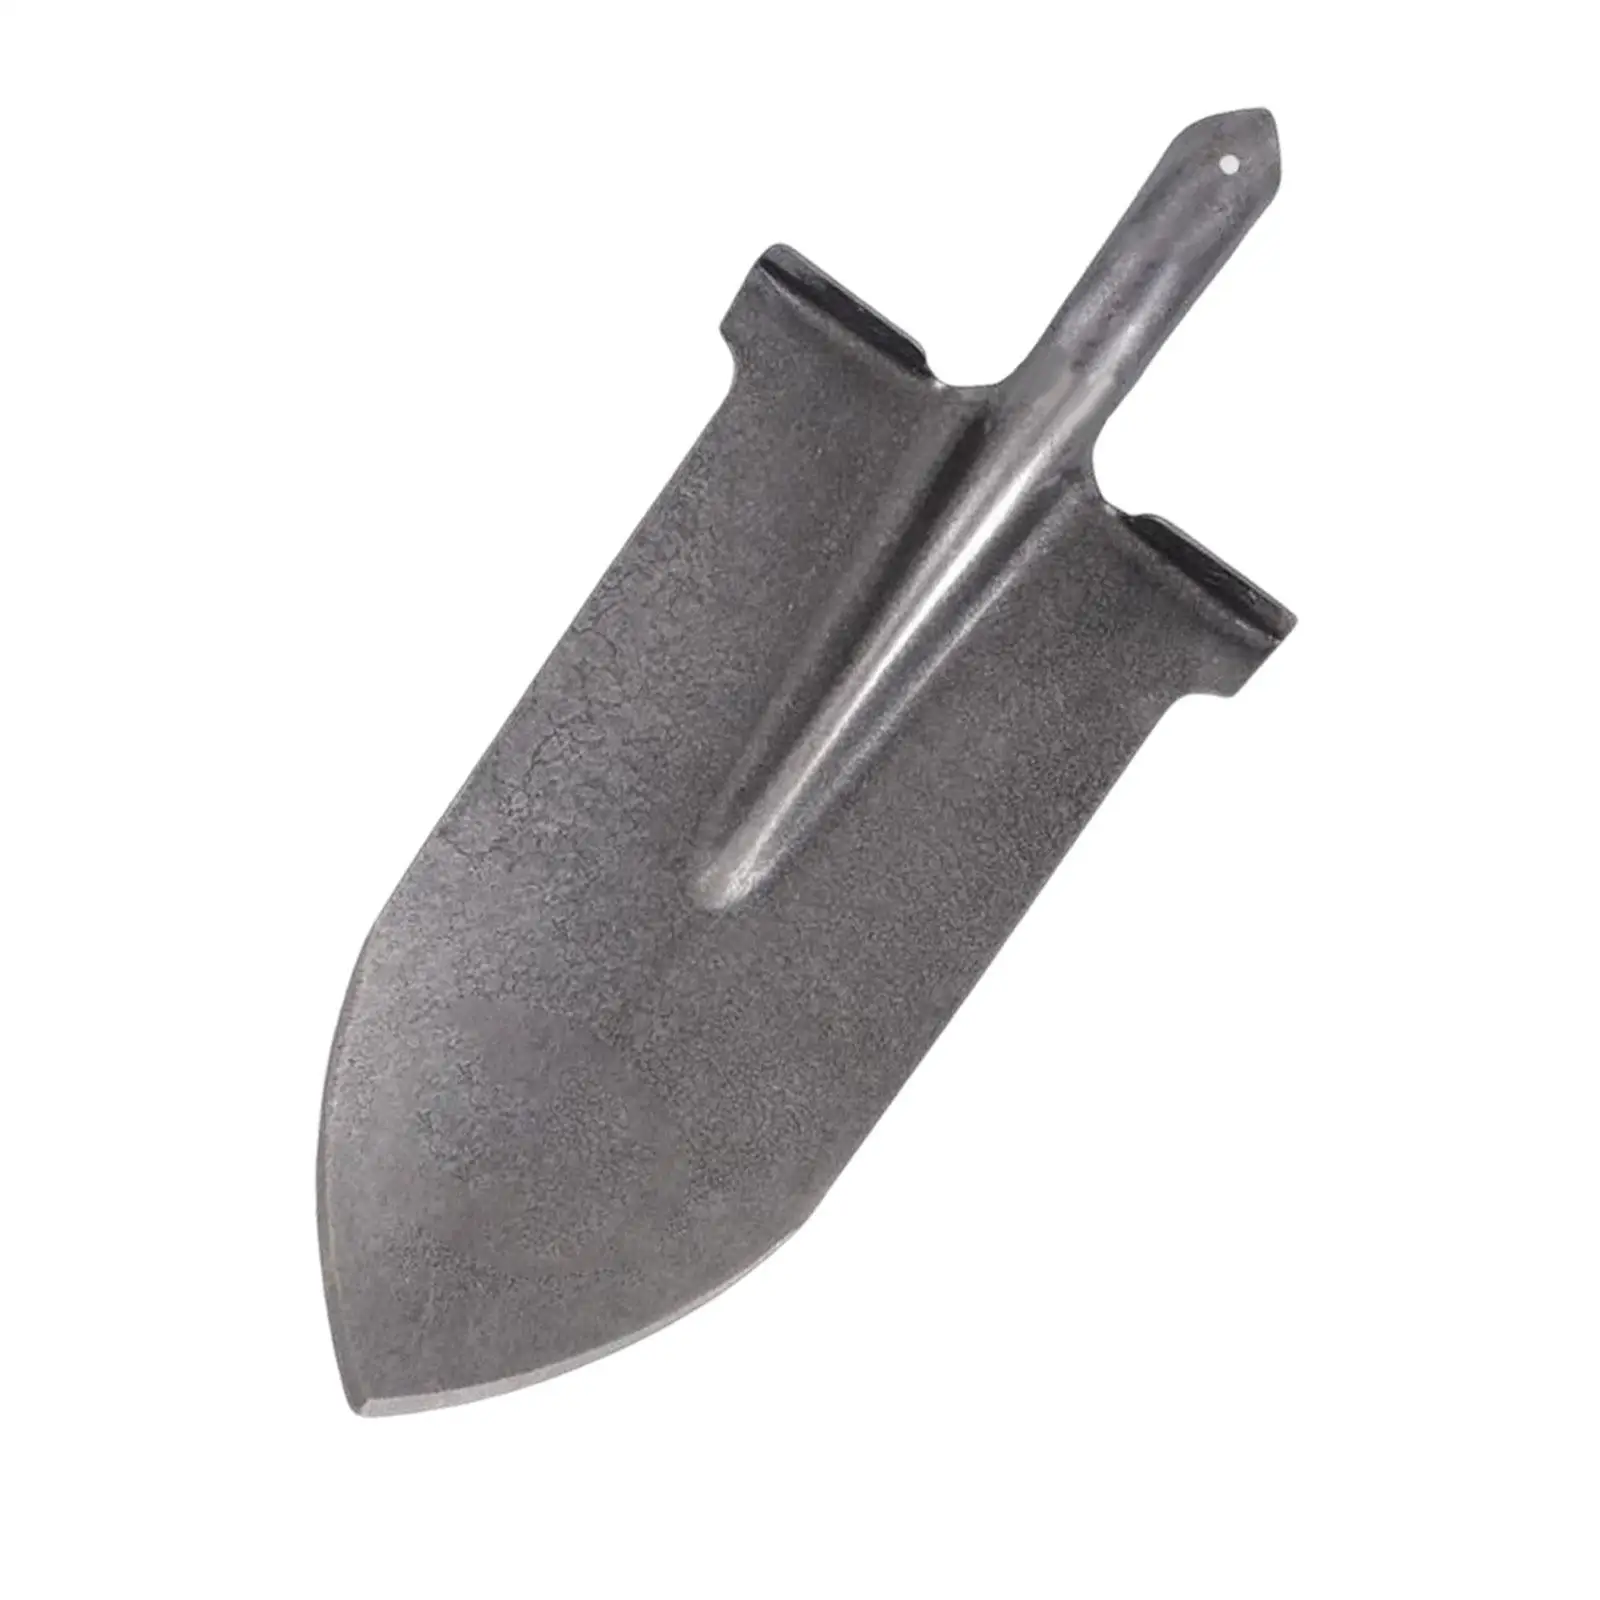 Backpacking Trowel Outdoor Sturdy Hand Trowel Garden Digging Tools for Camping Backpacking Transplanting Mixing Soil Weeding